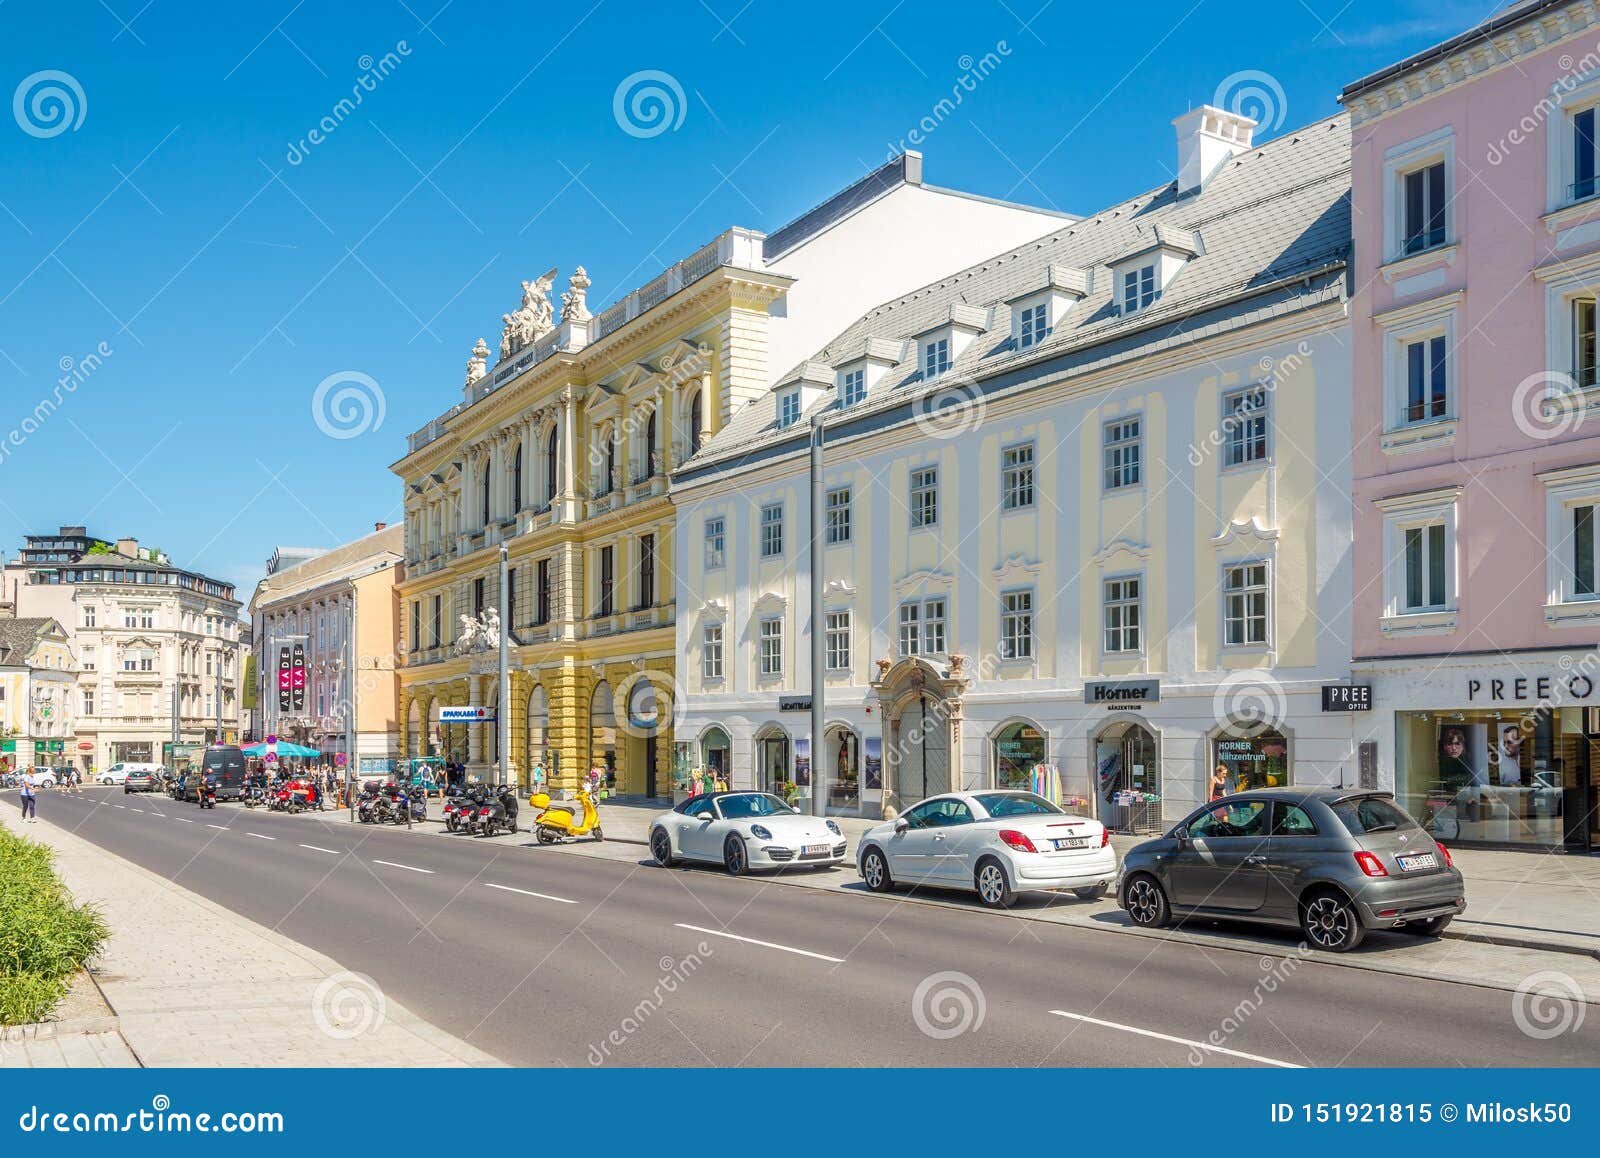 In The Streets Of Linz In Austria Editorial Image Image Of History Austria